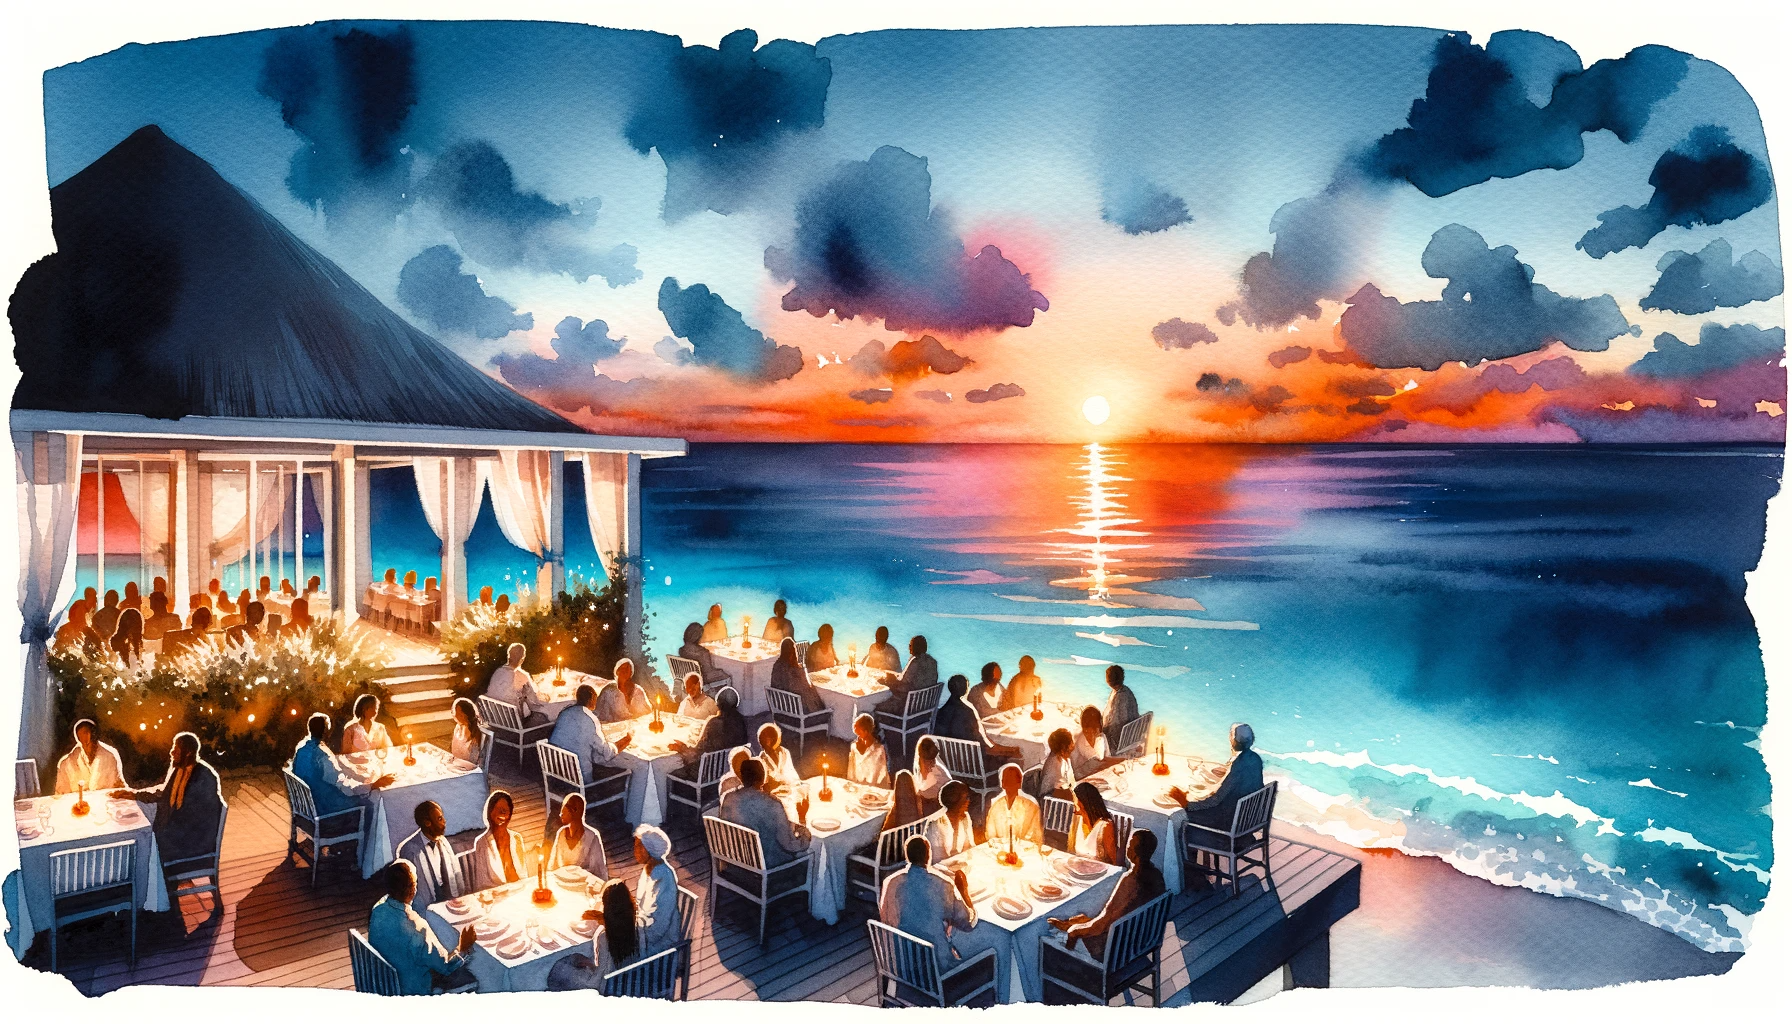 Sunset Dining at 7 Restaurant on 7 Mile: A Memorable Experience in Negril